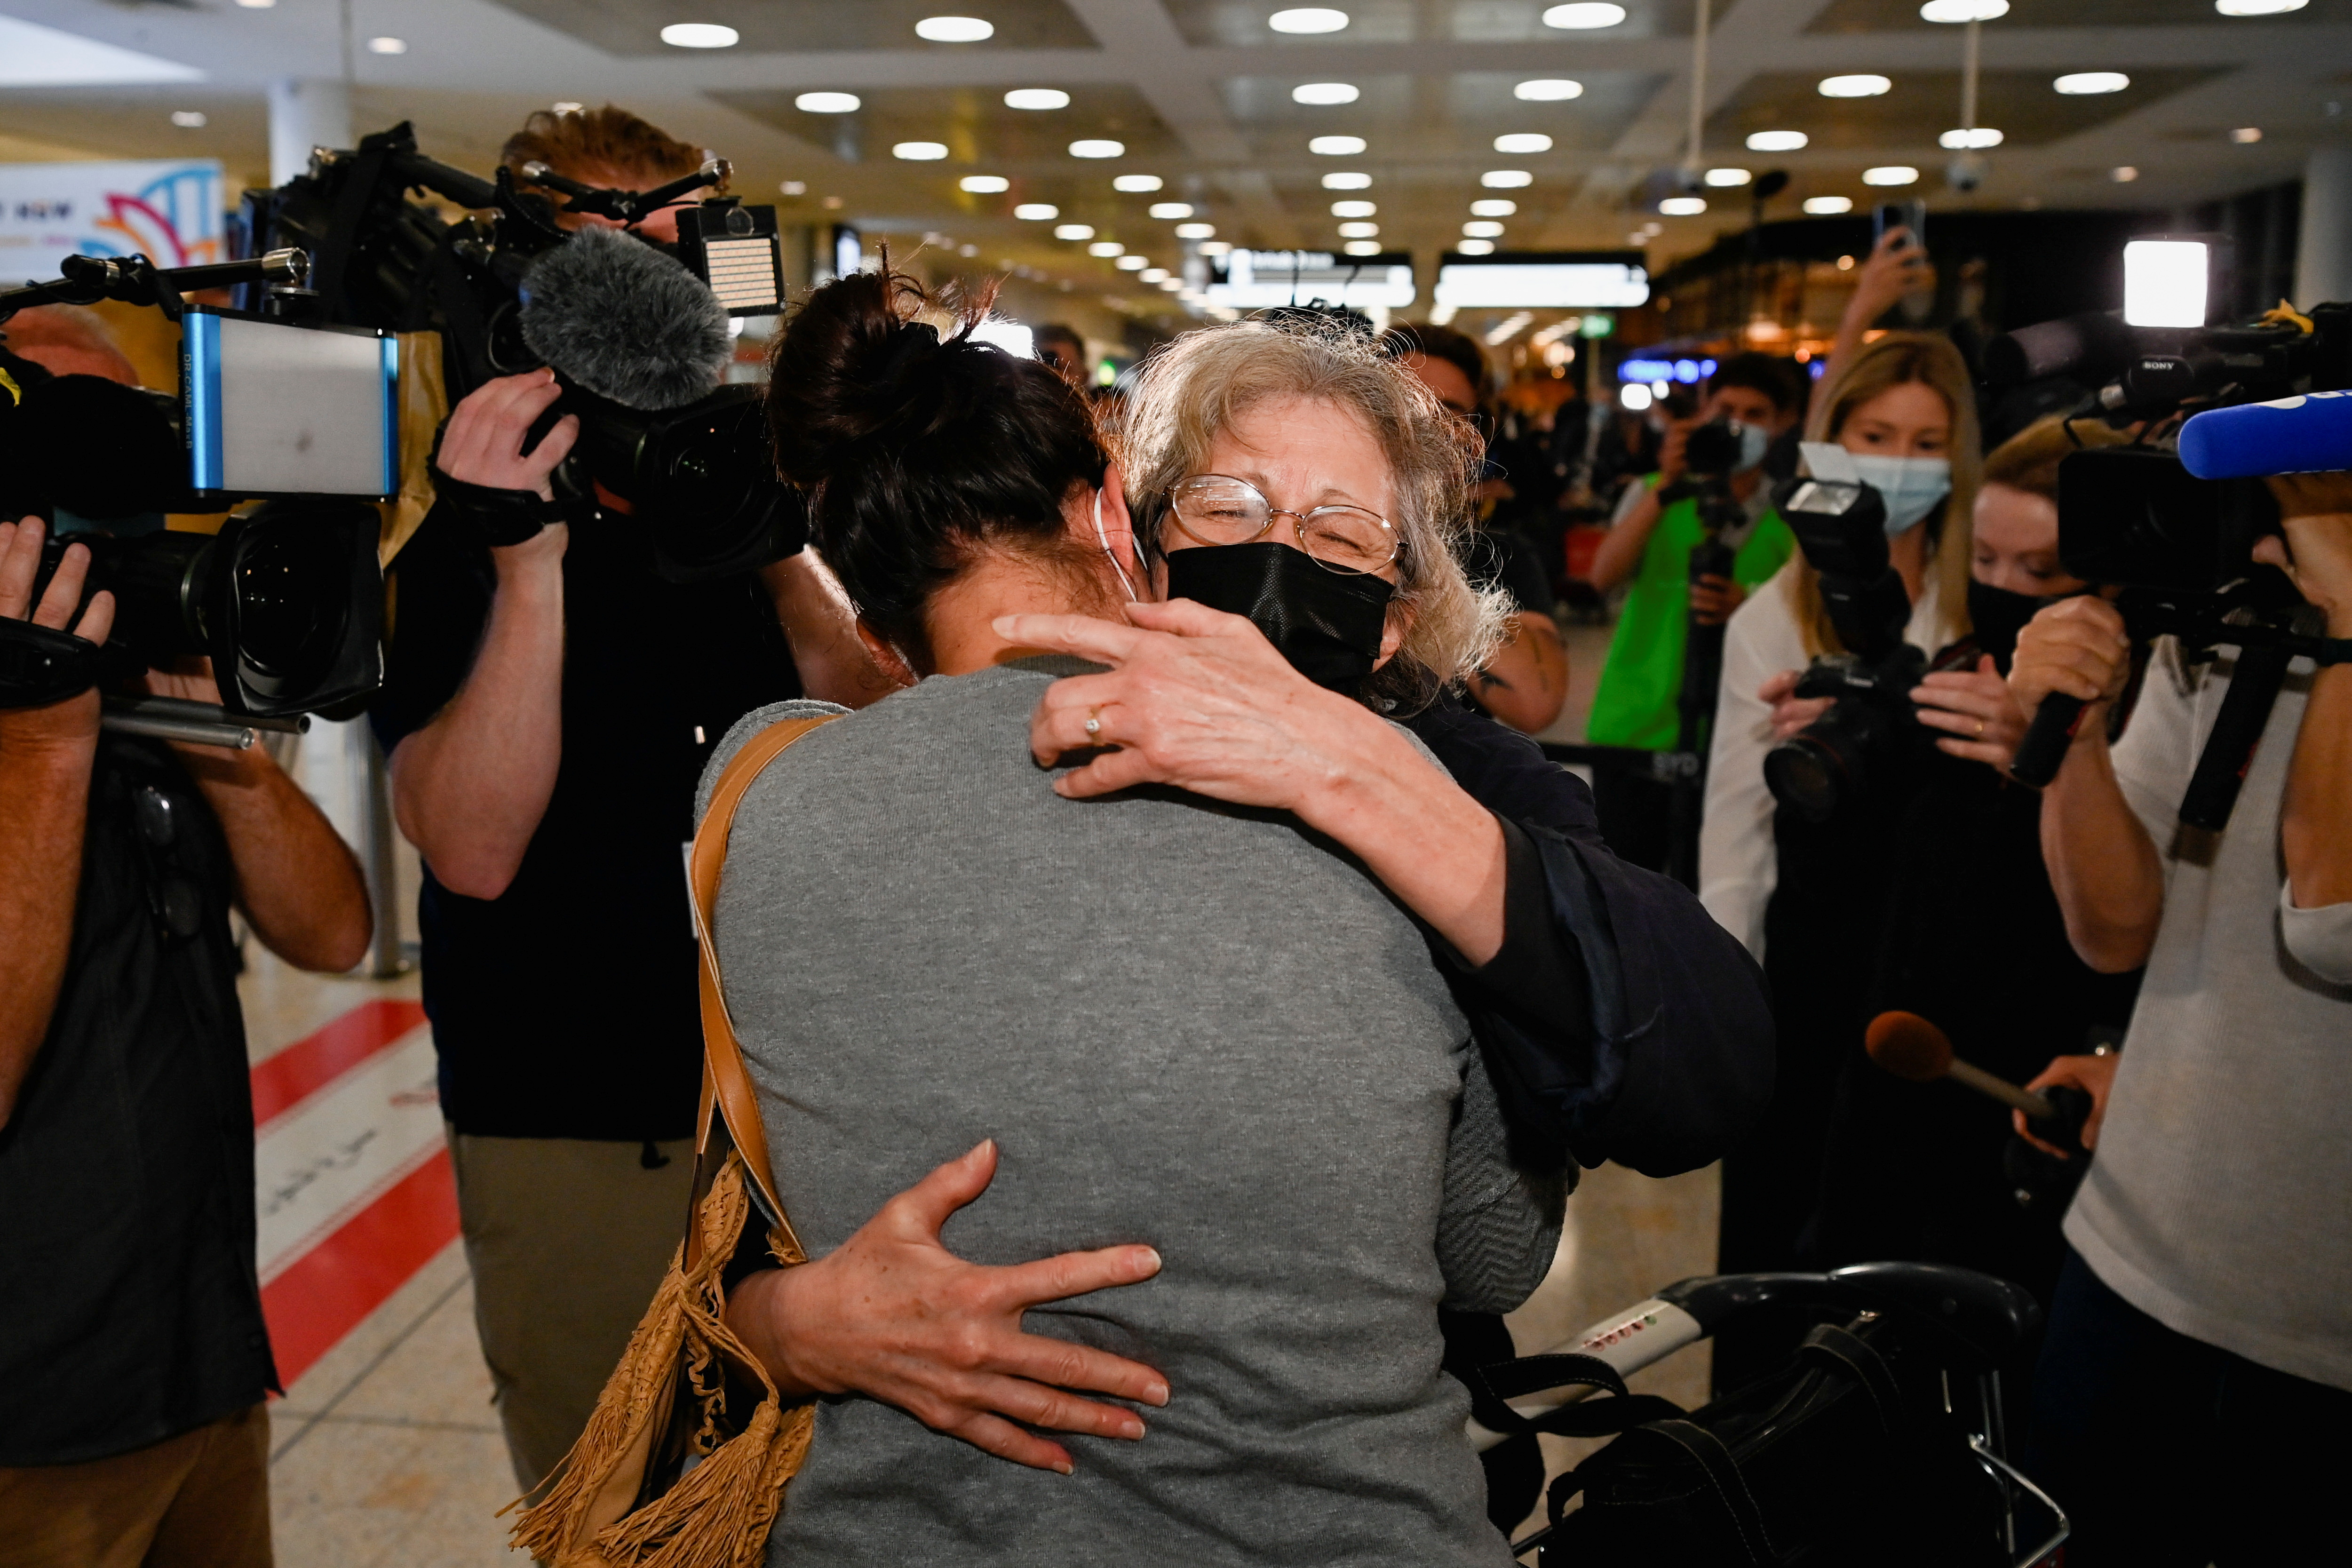 An international traveller is embraced as she arrives at Sydney Airport in the wake of coronavirus disease (COVID-19) border restrictions easing, with fully vaccinated Australians being allowed into Sydney from overseas without quarantine for the first time since March 2020, in Sydney, Australia, November 1, 2021.  REUTERS/Jaimi Joy